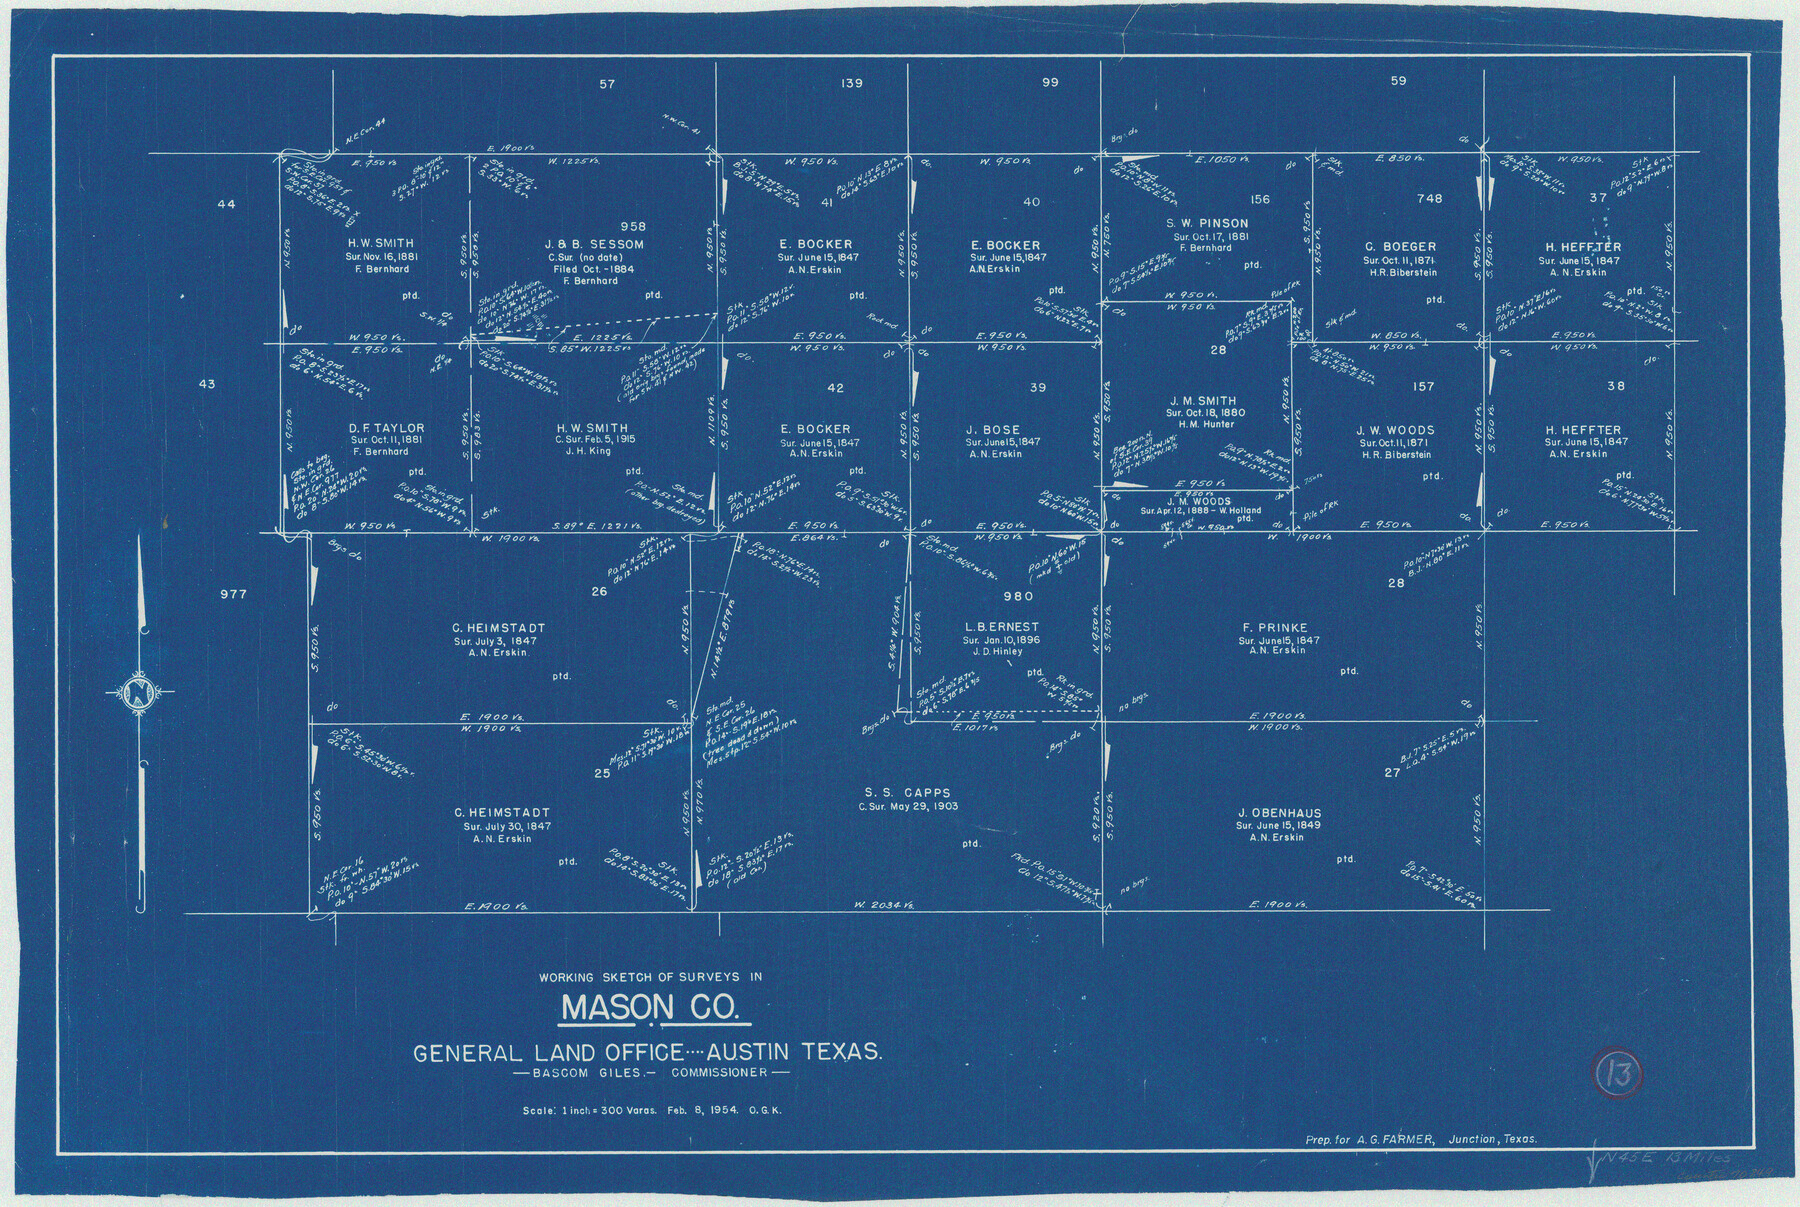 70849, Mason County Working Sketch 13, General Map Collection